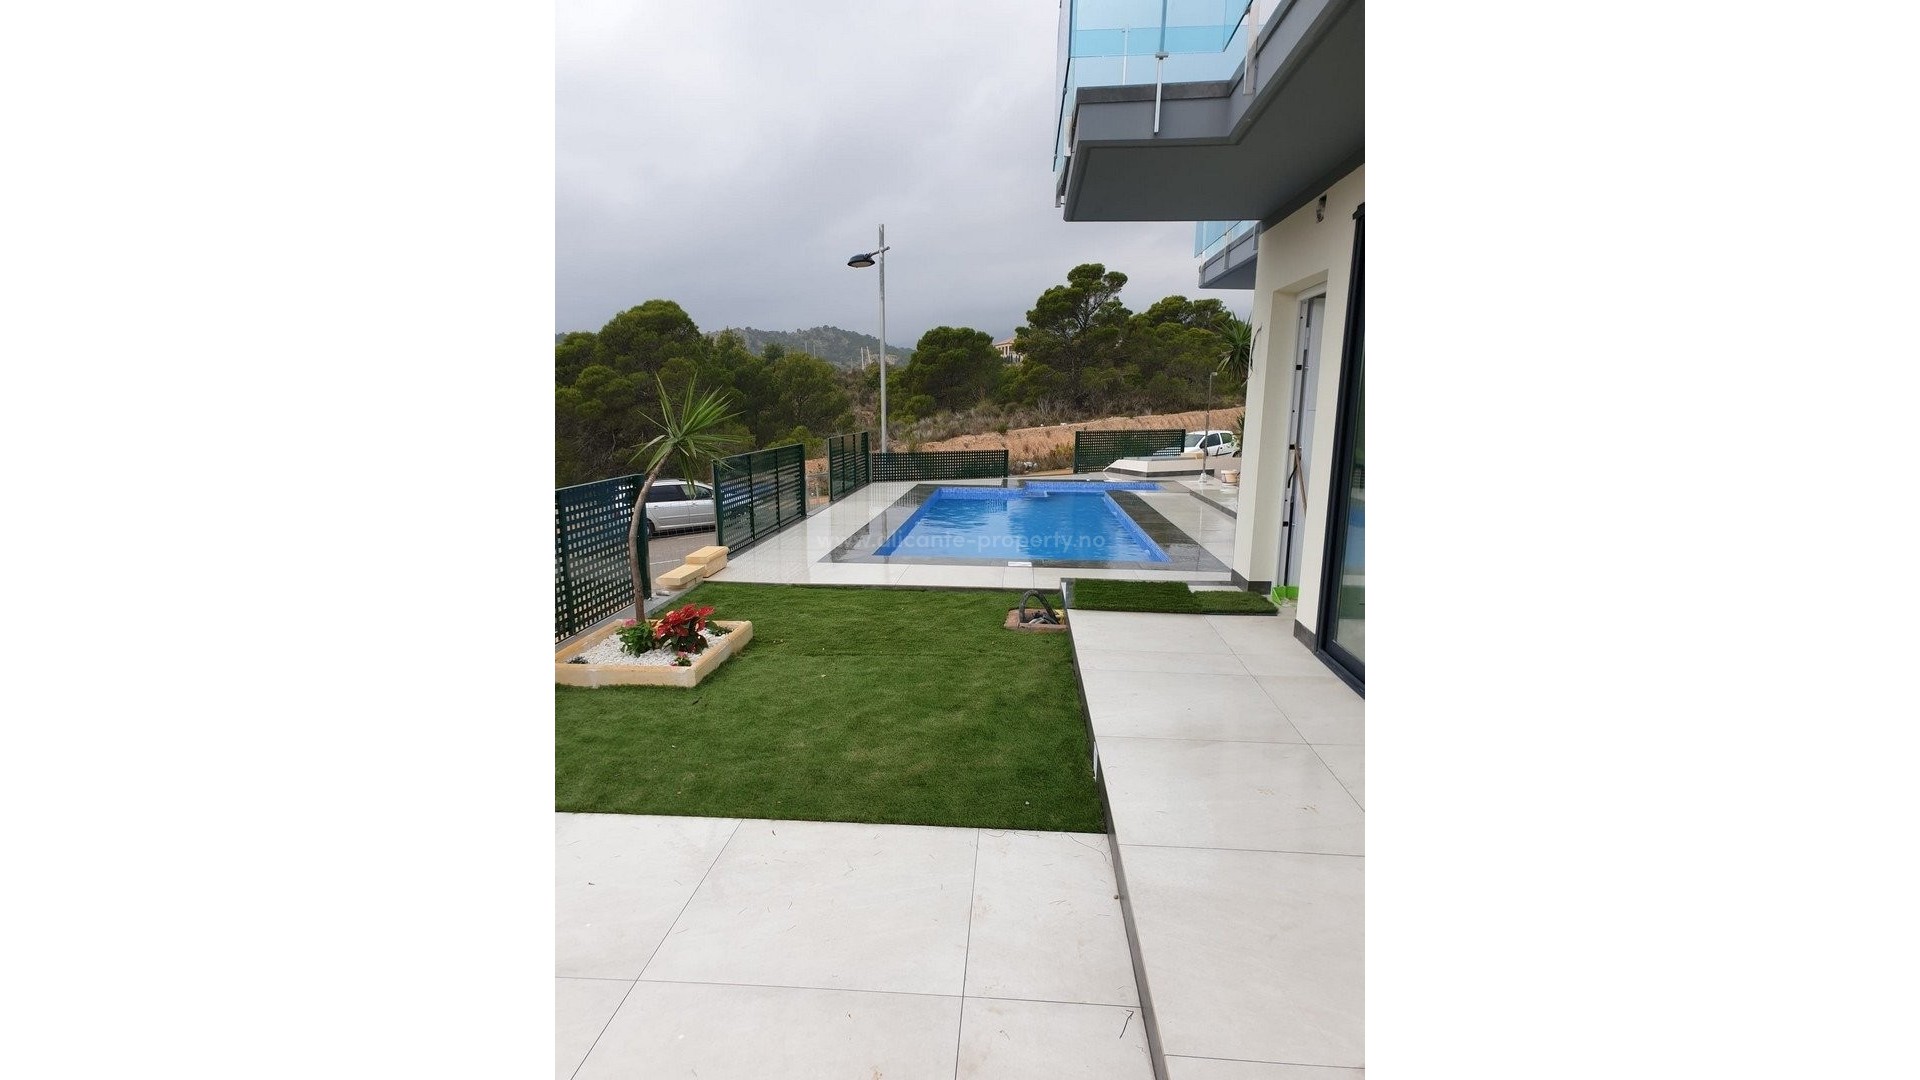 New villas/houses in Finestrat, Benidorm, 200 meters to golf, swimming pool, 3 bedrooms, 3 bathrooms, open terrace, solarium and parking for 2 cars